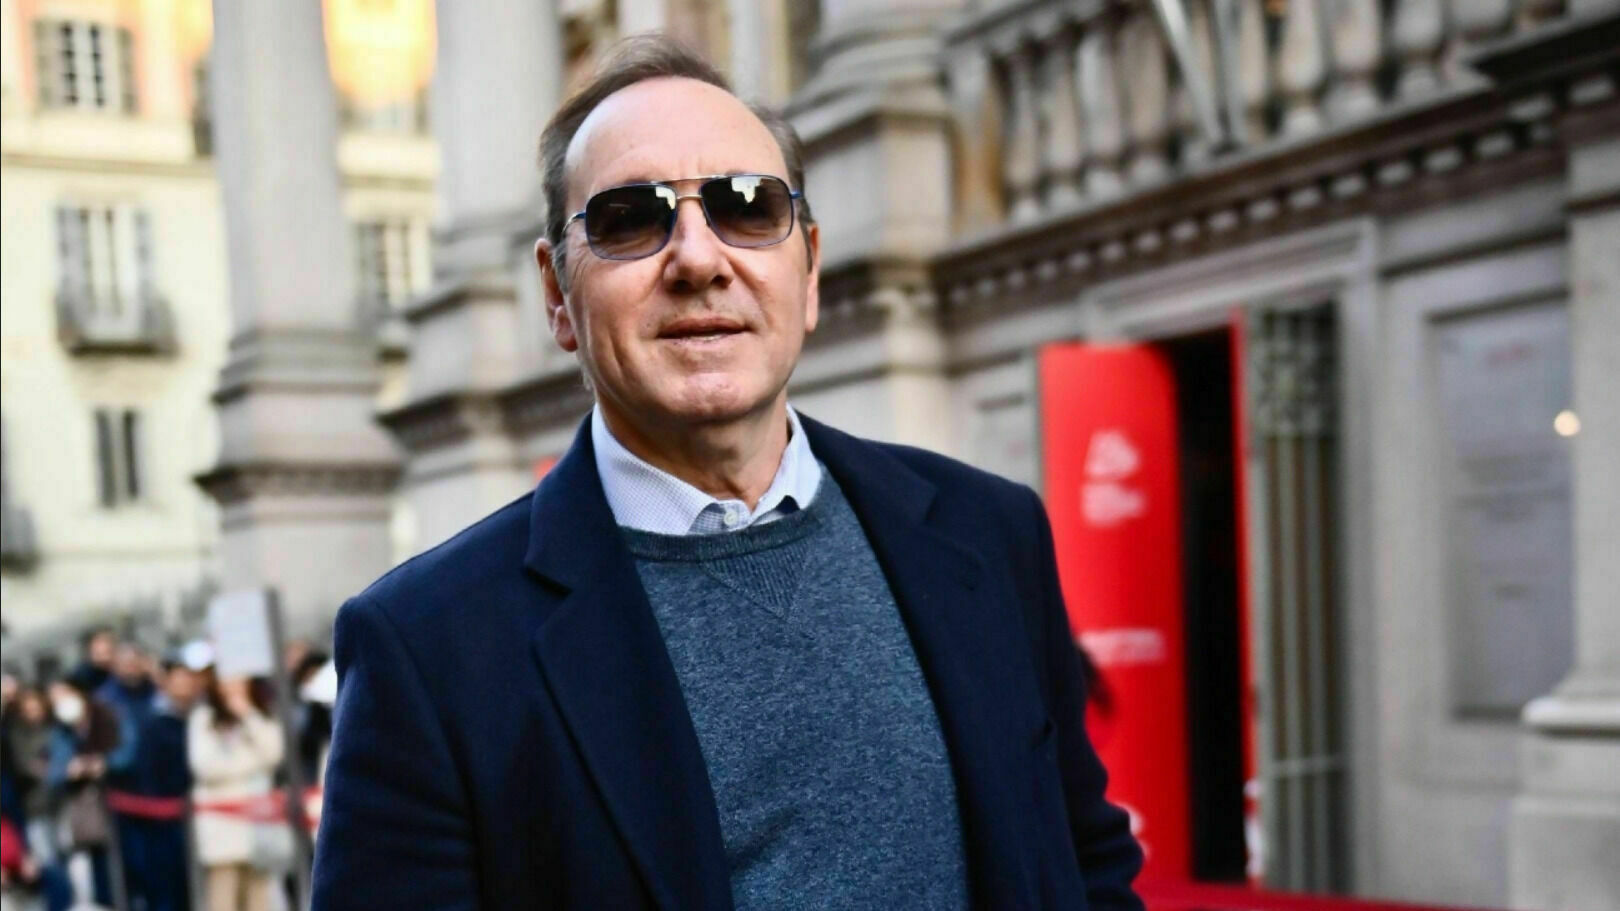 Kevin Spacey received the award of the National Museum of Cinema of Italy